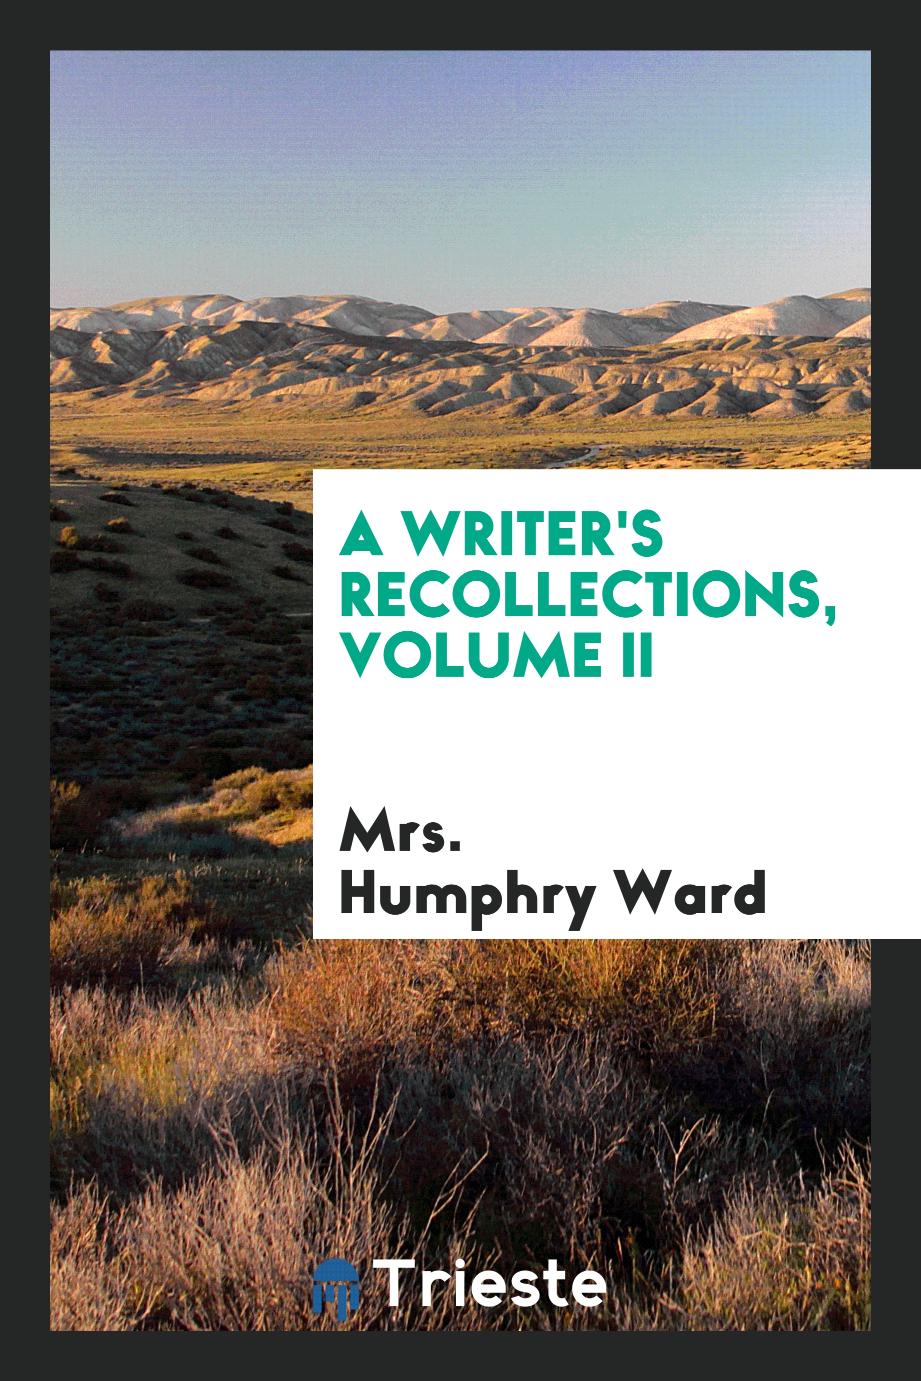 A writer's recollections, Volume II